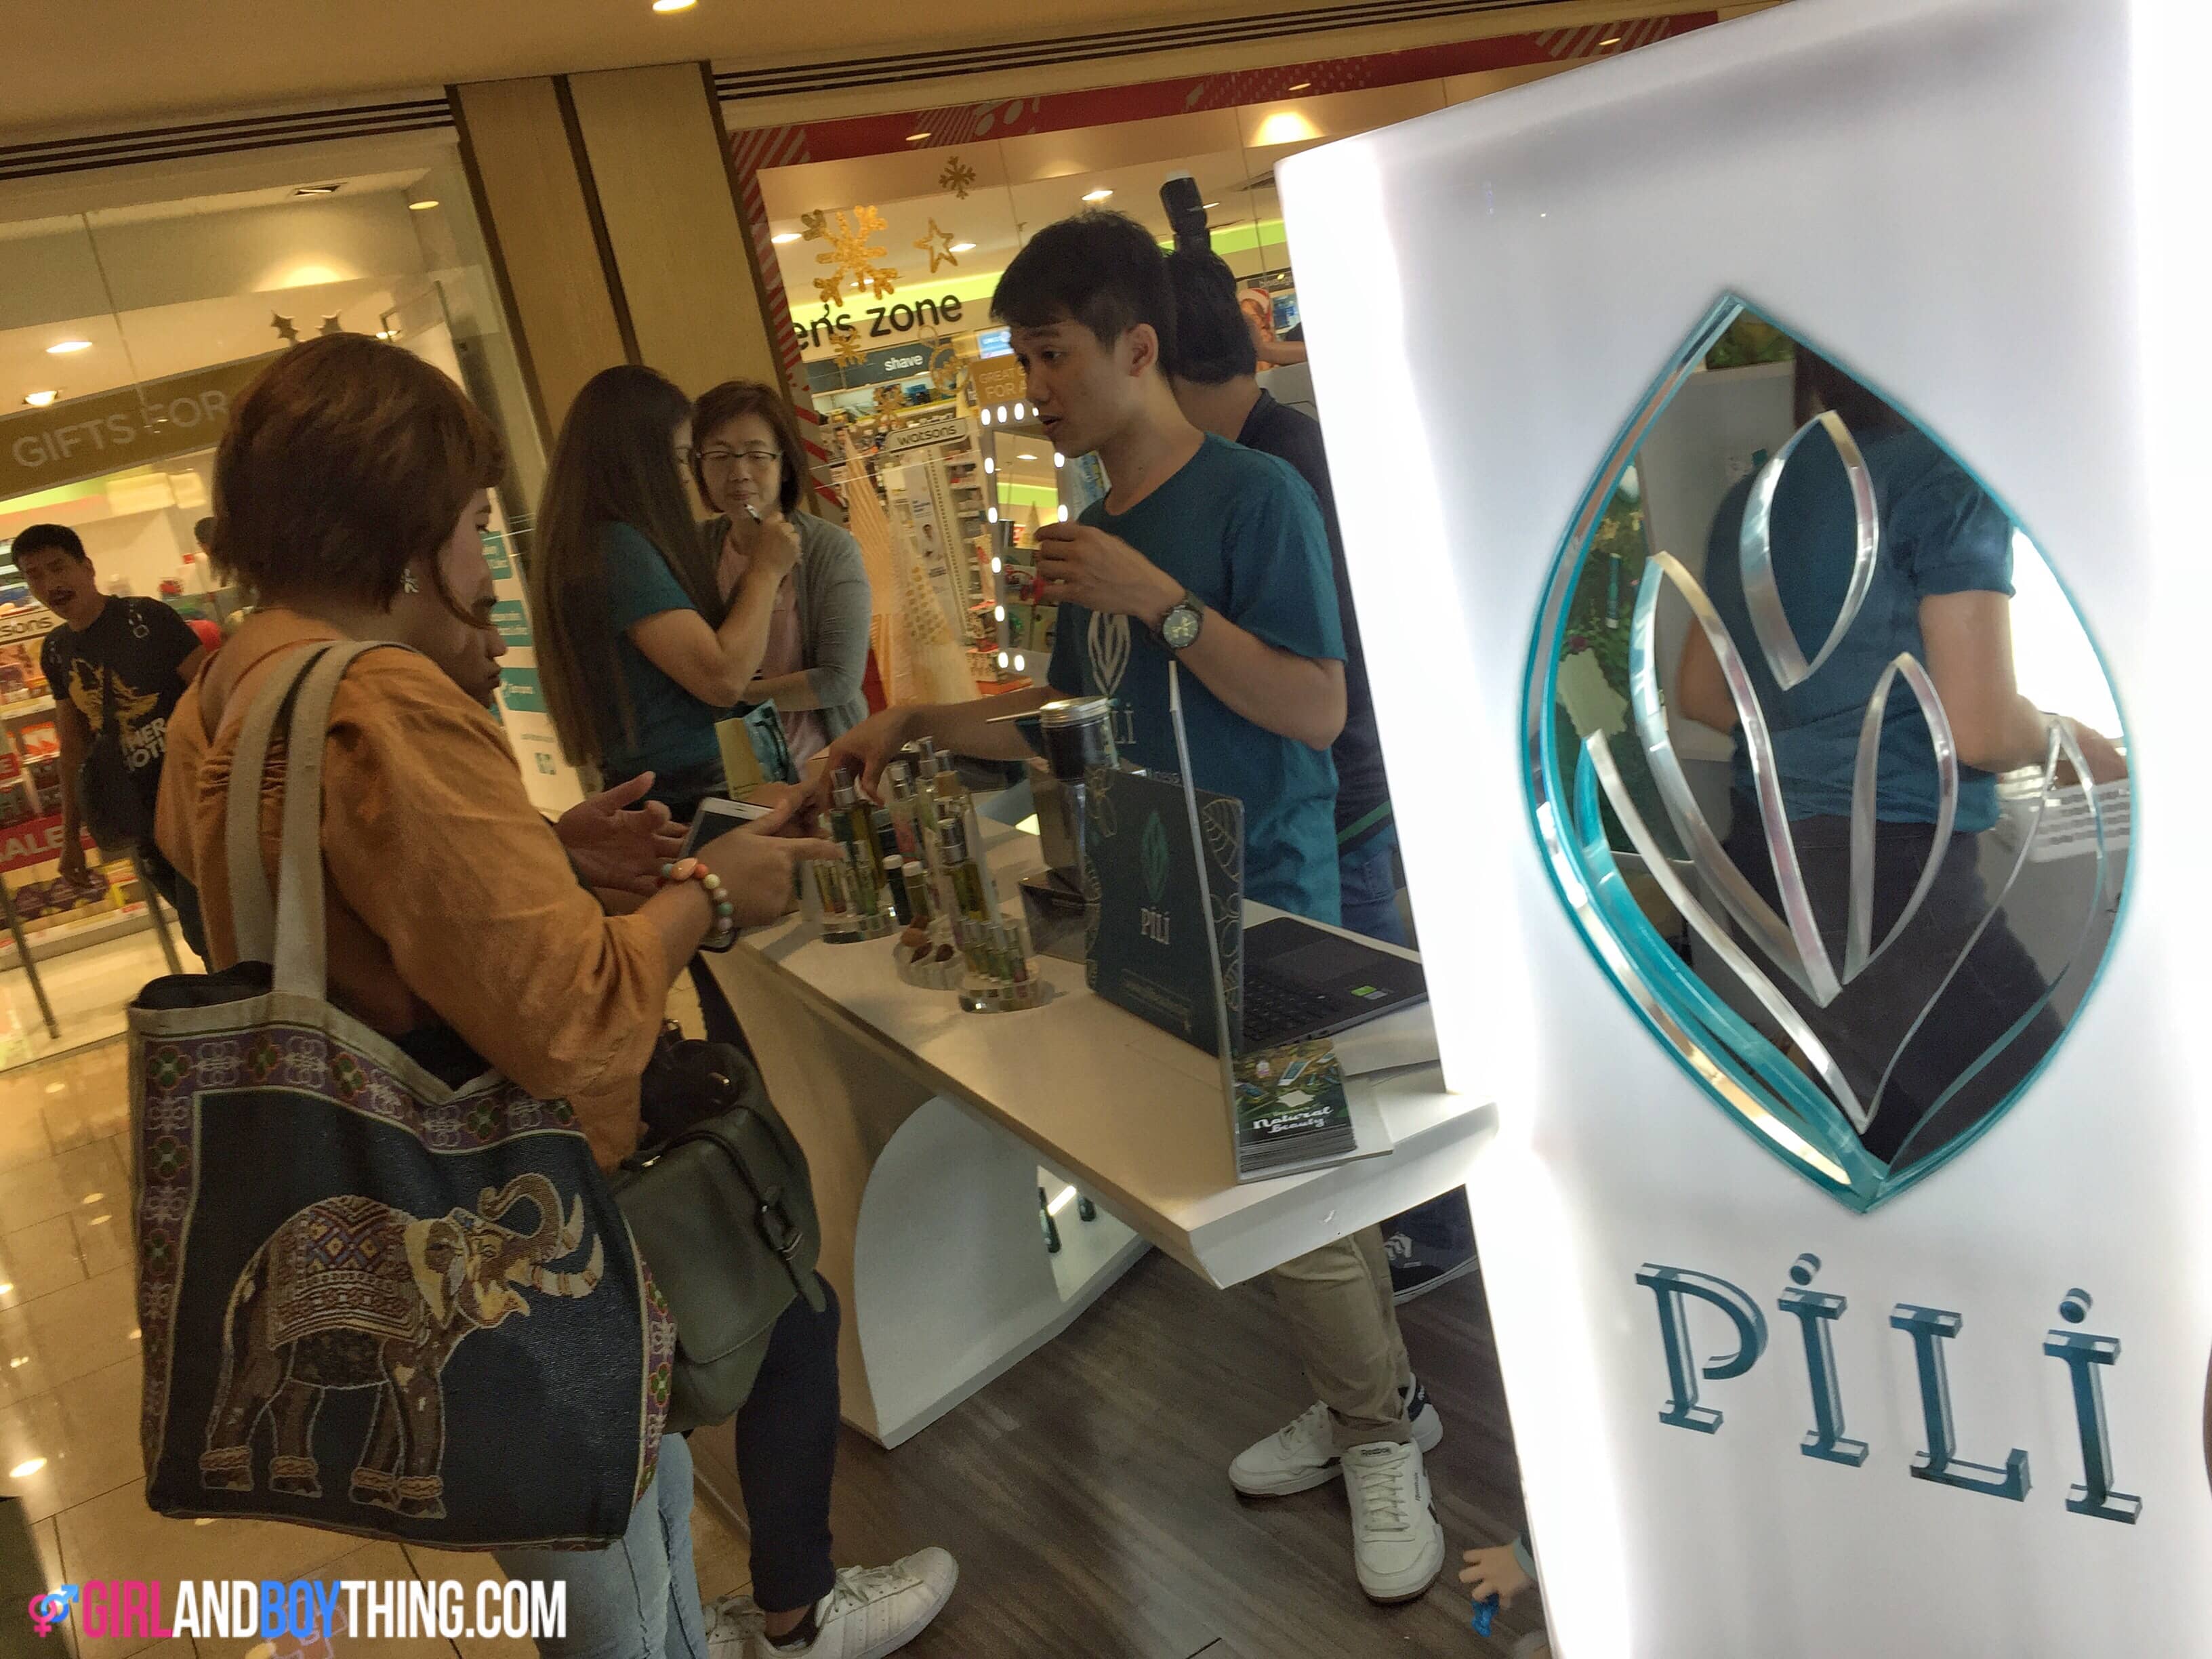 Pili Beauty and Wellness Opens its Newest Branch in Shangri-La Mall